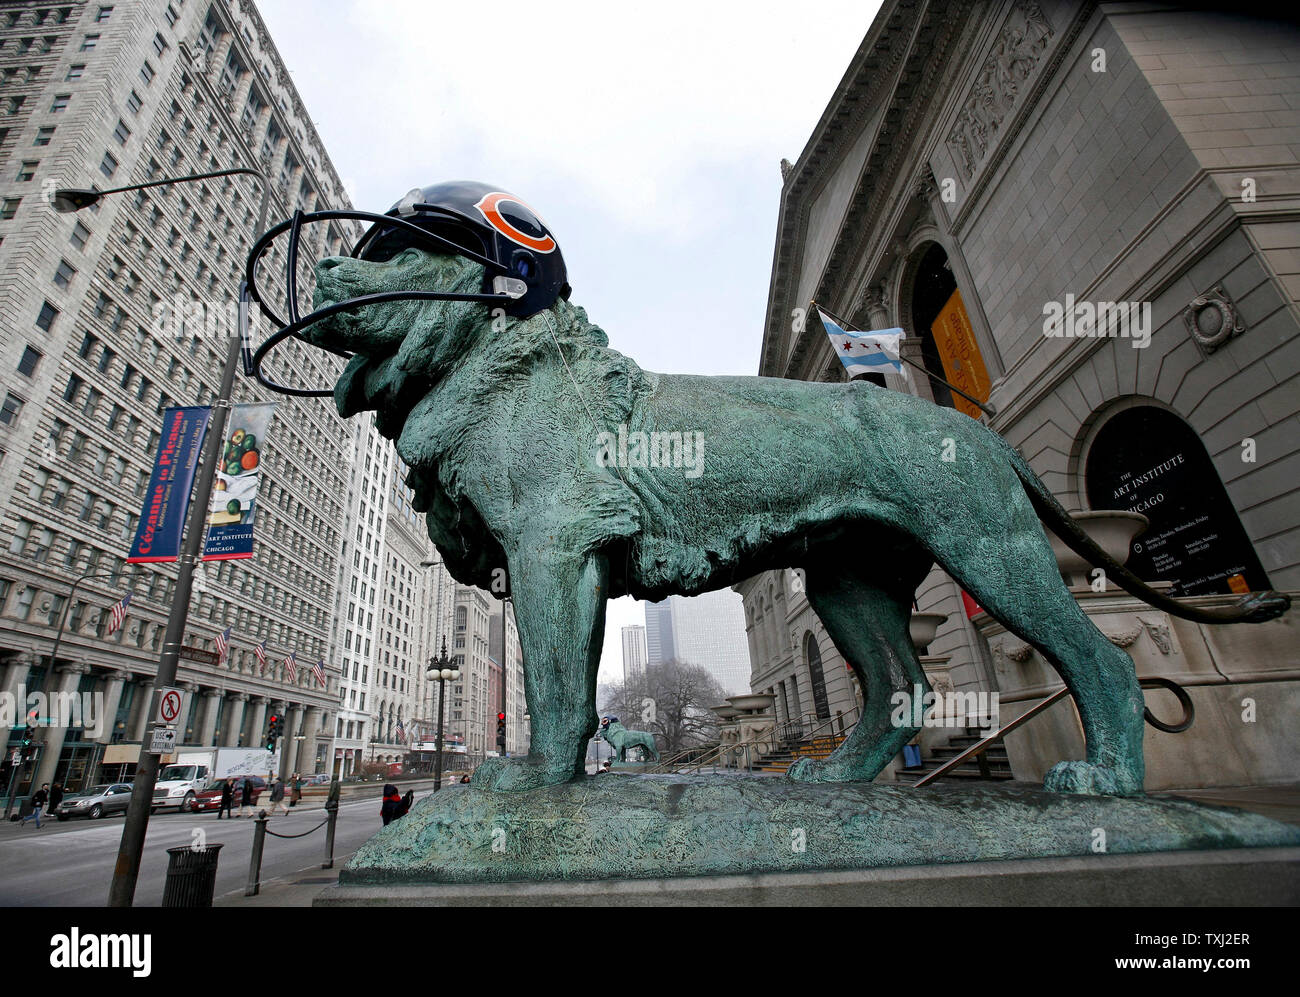 One of the two bronze lions wears a fiberglass Chicago Bears helmet at The Art Institute of Chicago on February 2, 2007, in Chicago. The lions were fitted with fiberglass helmets to celebrate the Bears winning season. The Bears play the Indianapolis Colts in Super Bowl XLI on Sunday. (UPI Photo/Brian Kersey) Stock Photo